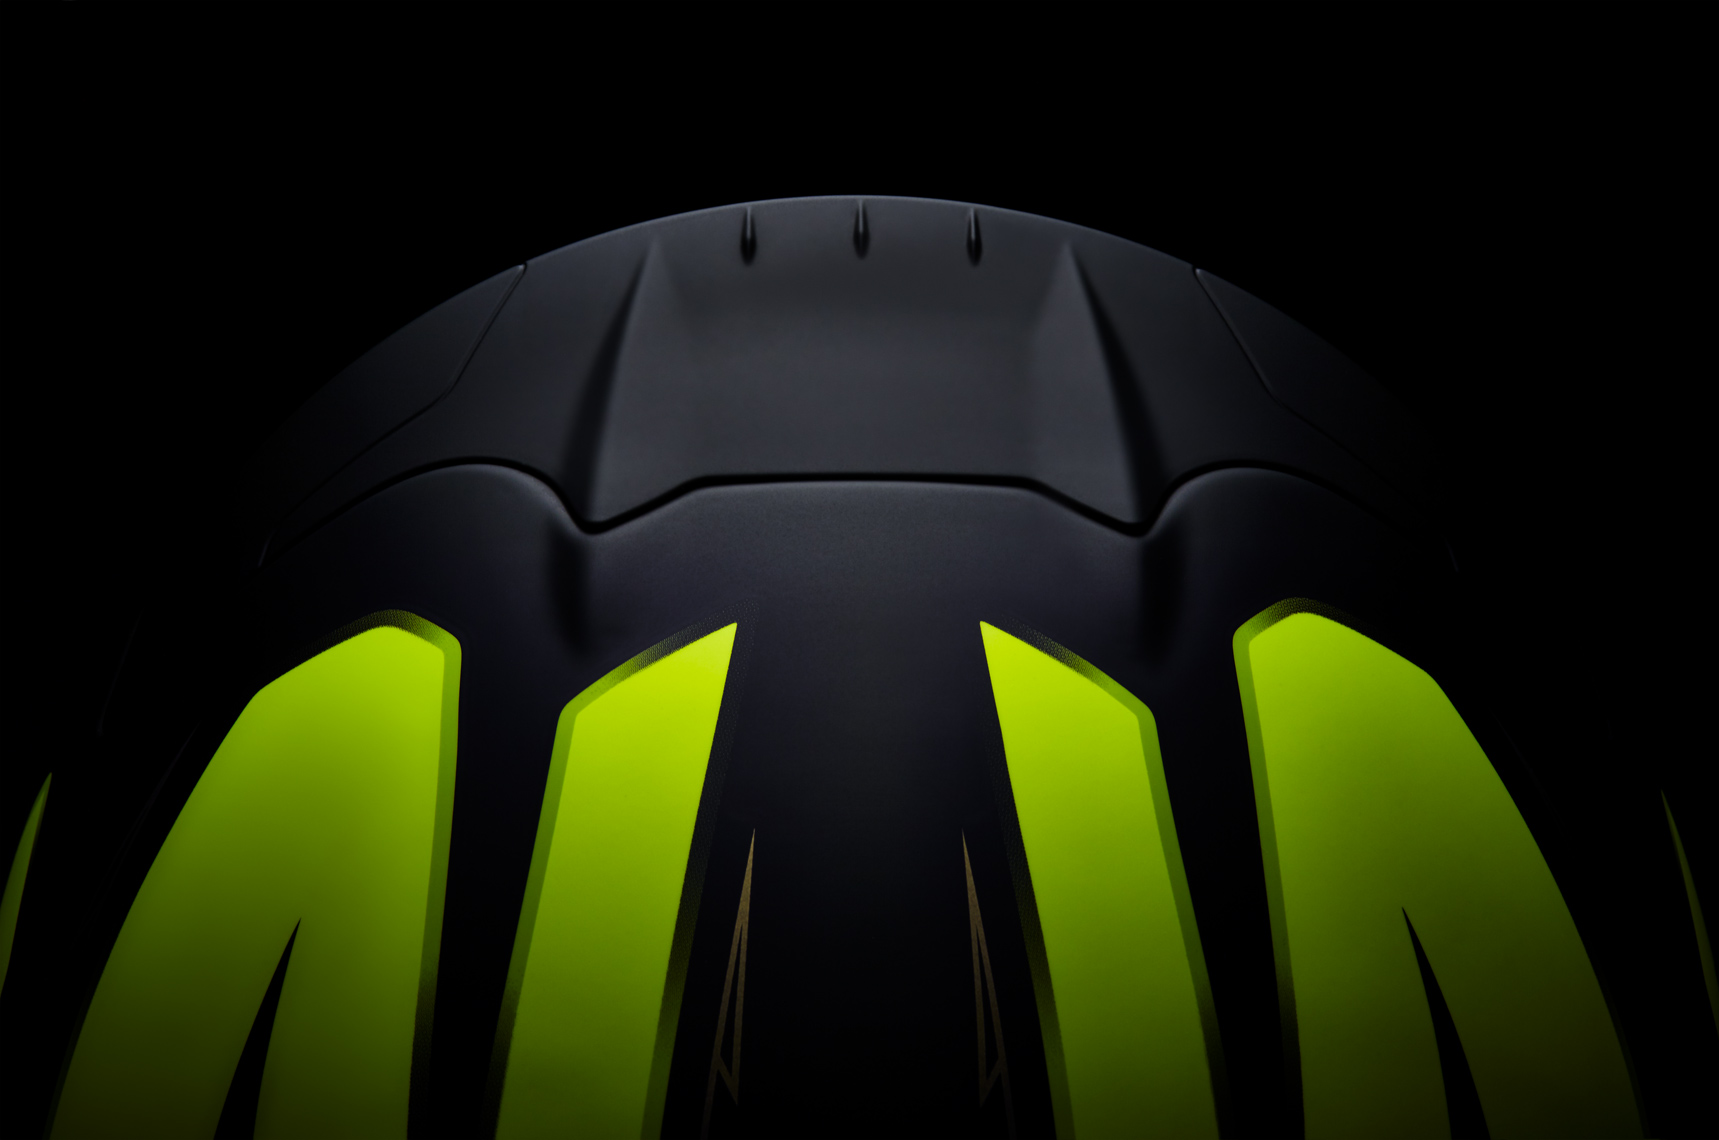 Product Photography Gear Shoei Road Racing Street Helmet Detail Venting Saftey Yellow Green